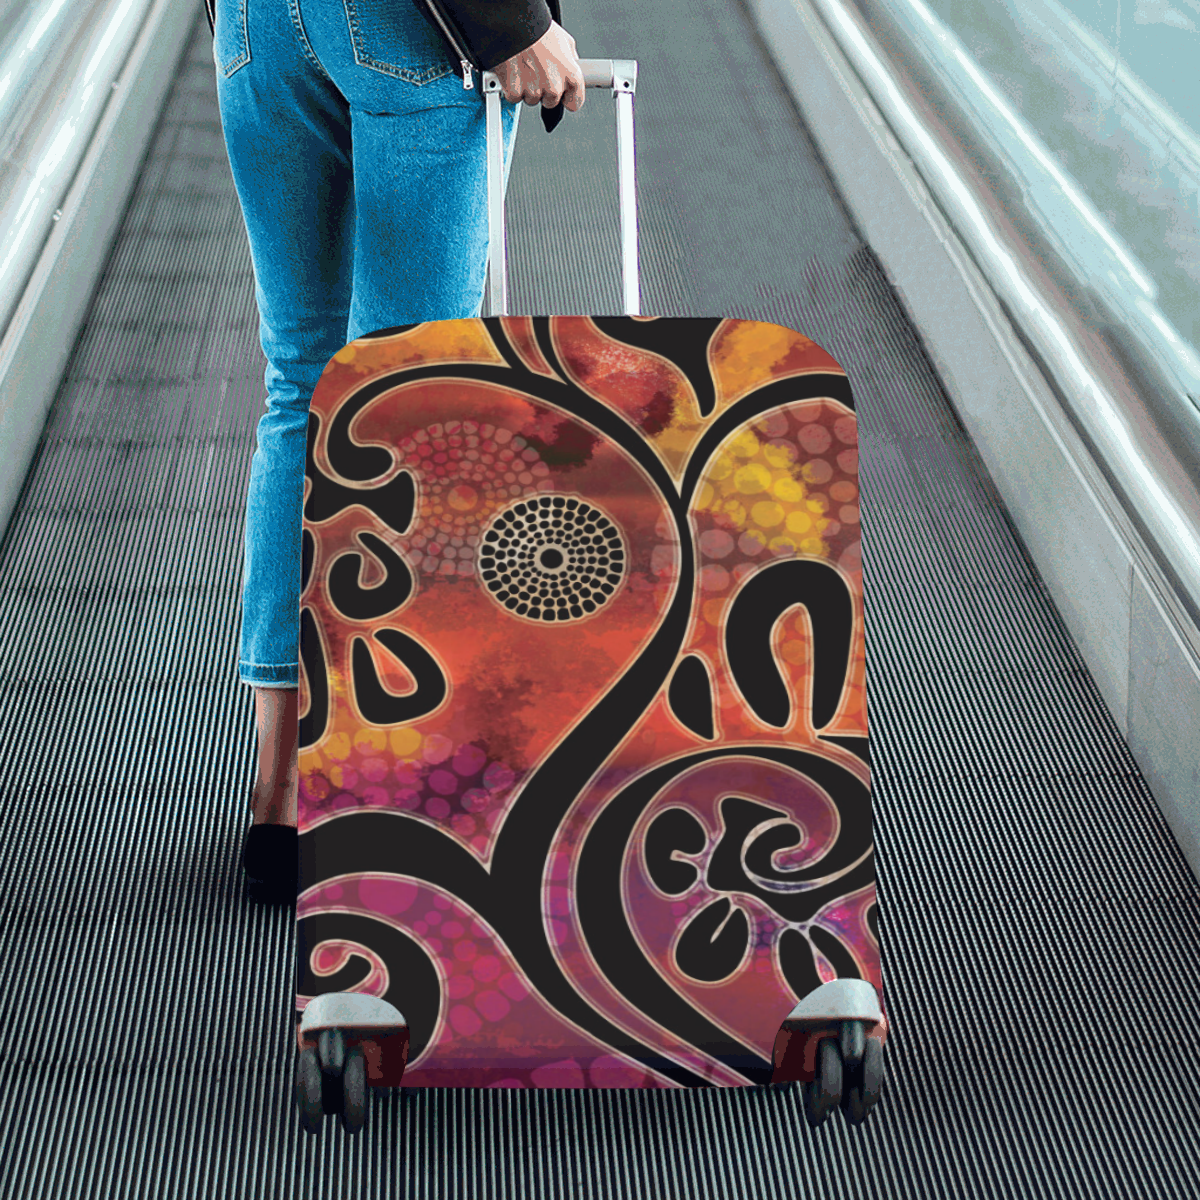 exotic vines Luggage Cover/Large 26"-28"